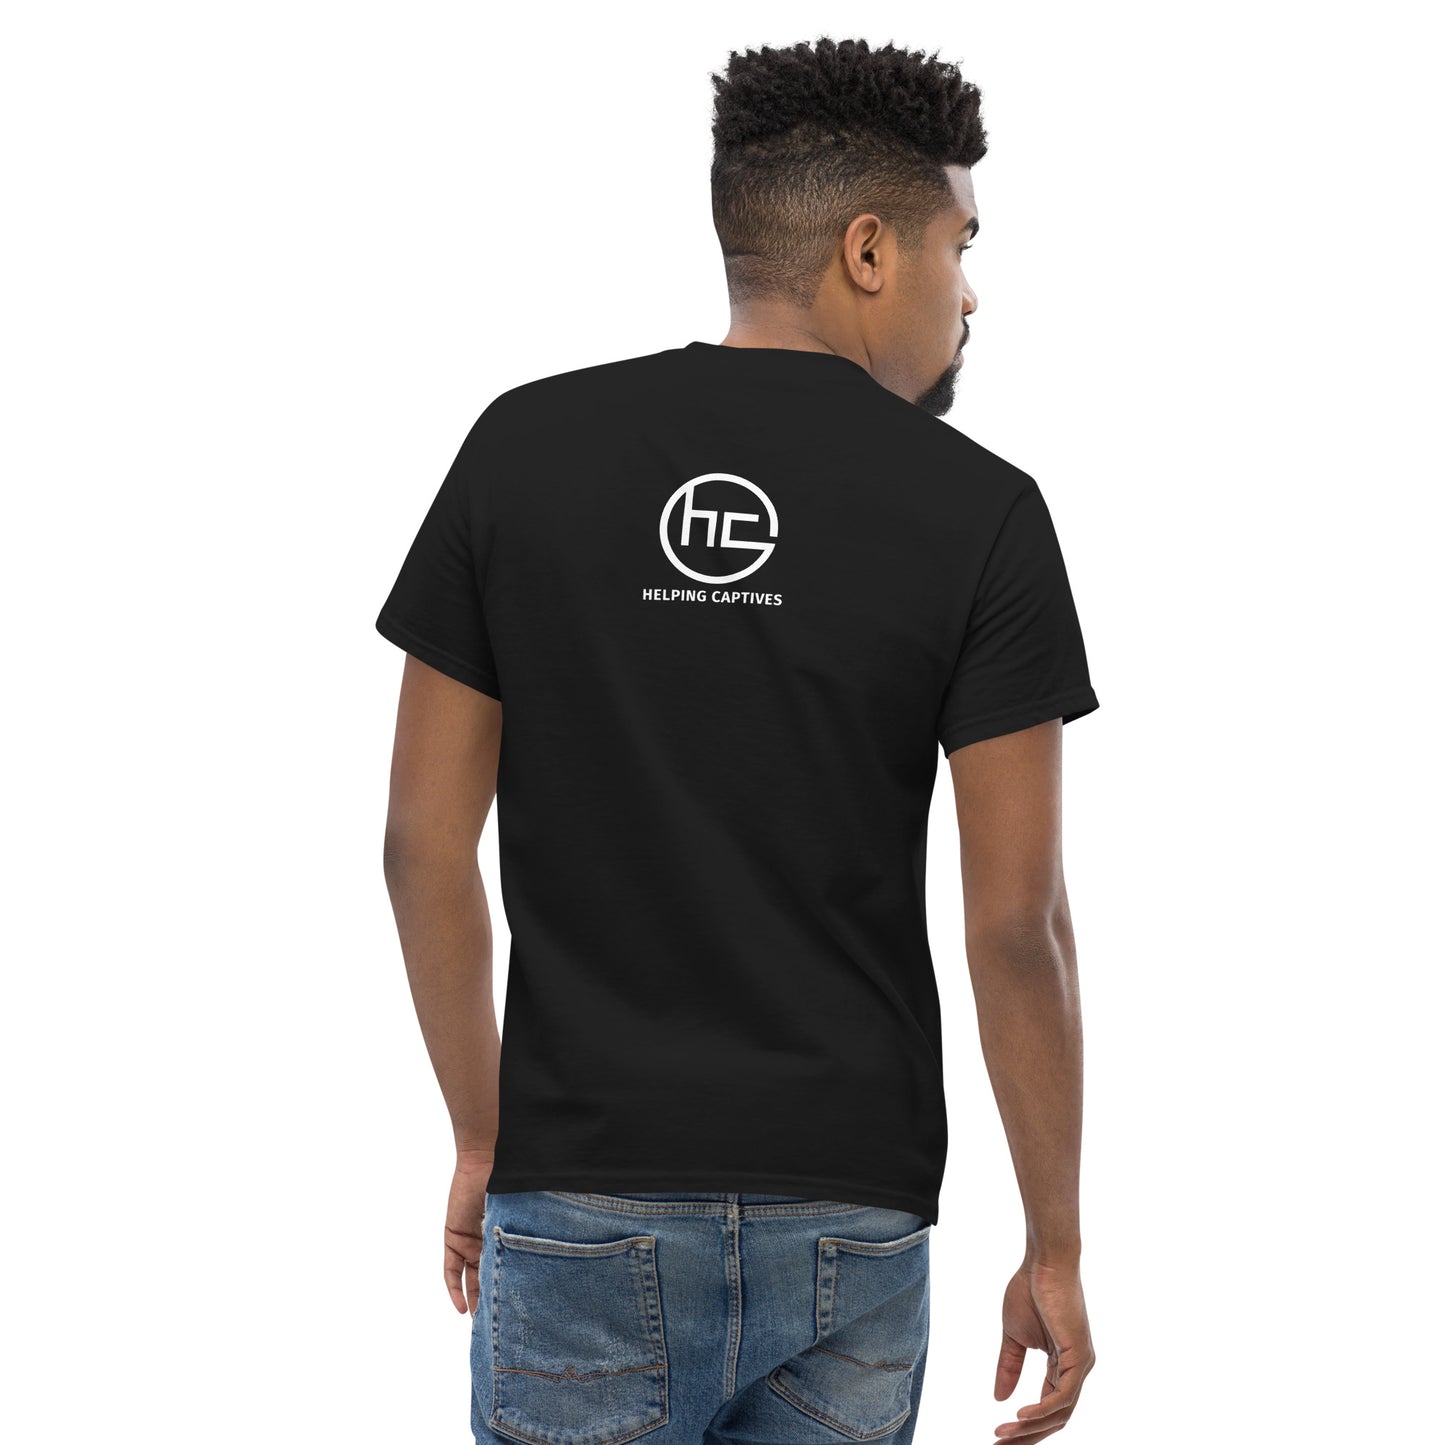 Men's People Are Not Property Tee